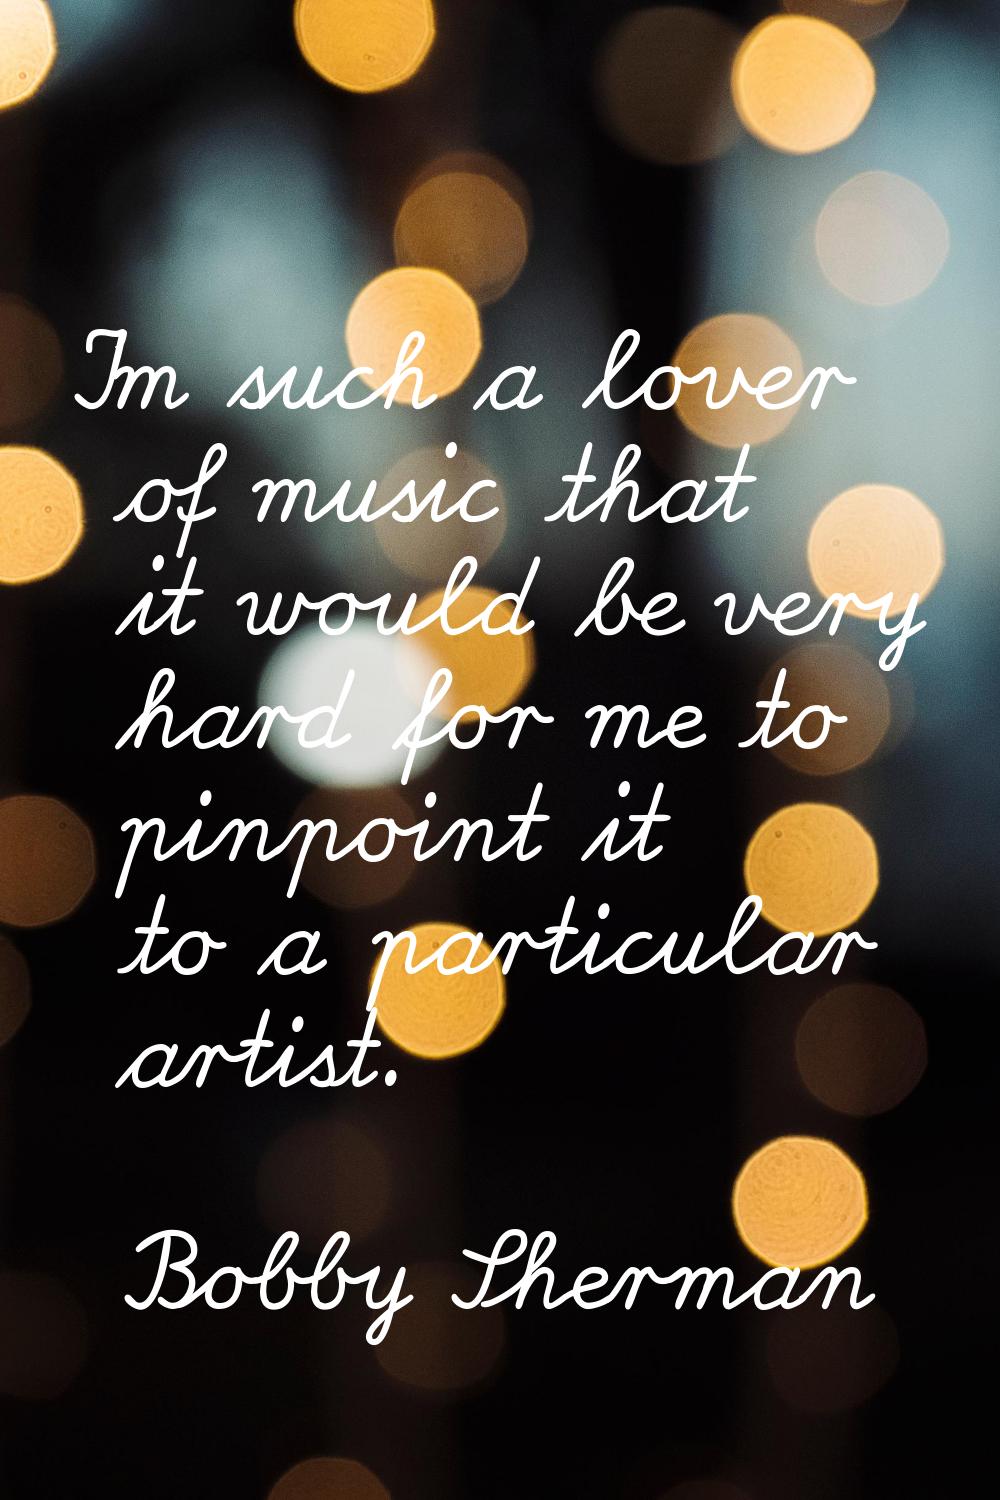 I'm such a lover of music that it would be very hard for me to pinpoint it to a particular artist.